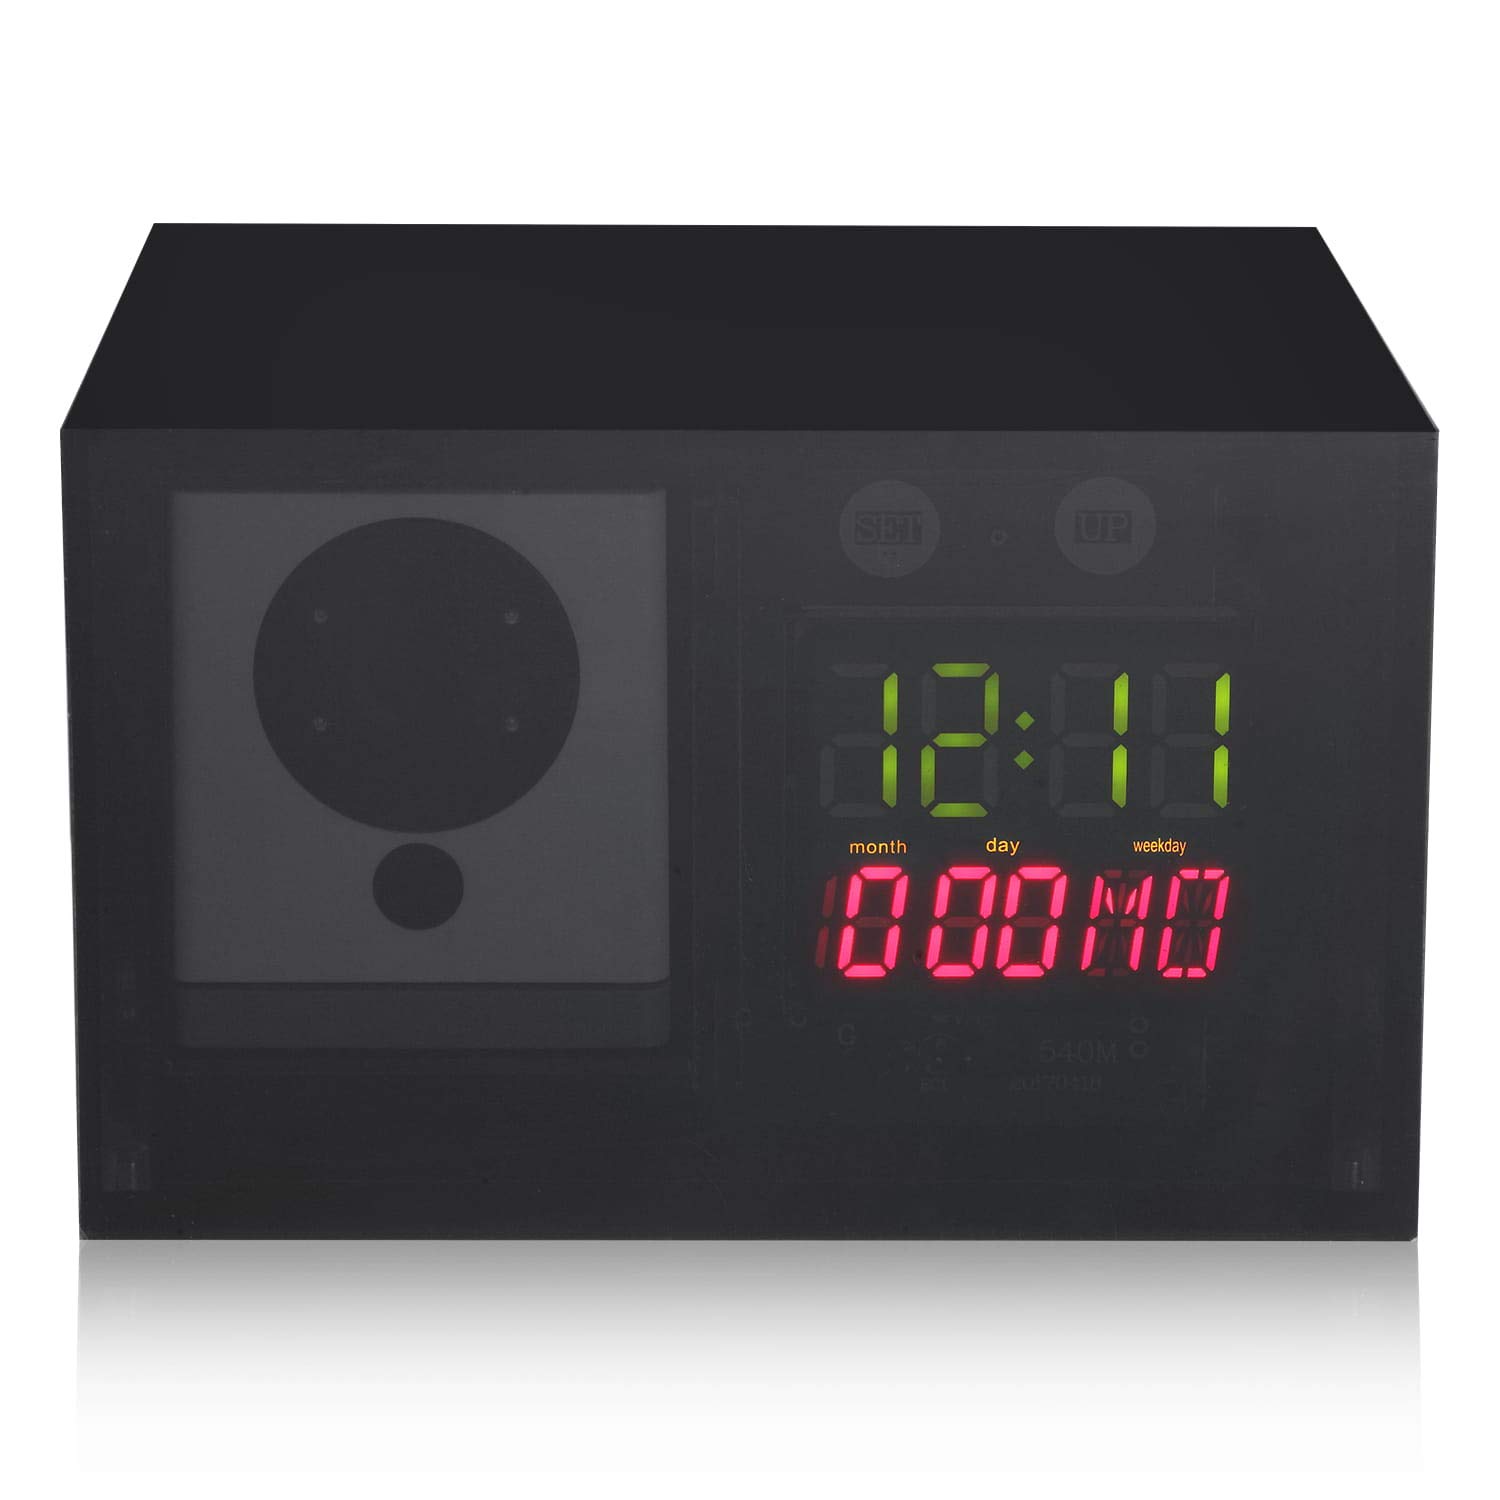 Book Cover Hidden Clock Case Compatible with Wyze Cam - Perfectly Conceal The Camera for Improved Surveillance.